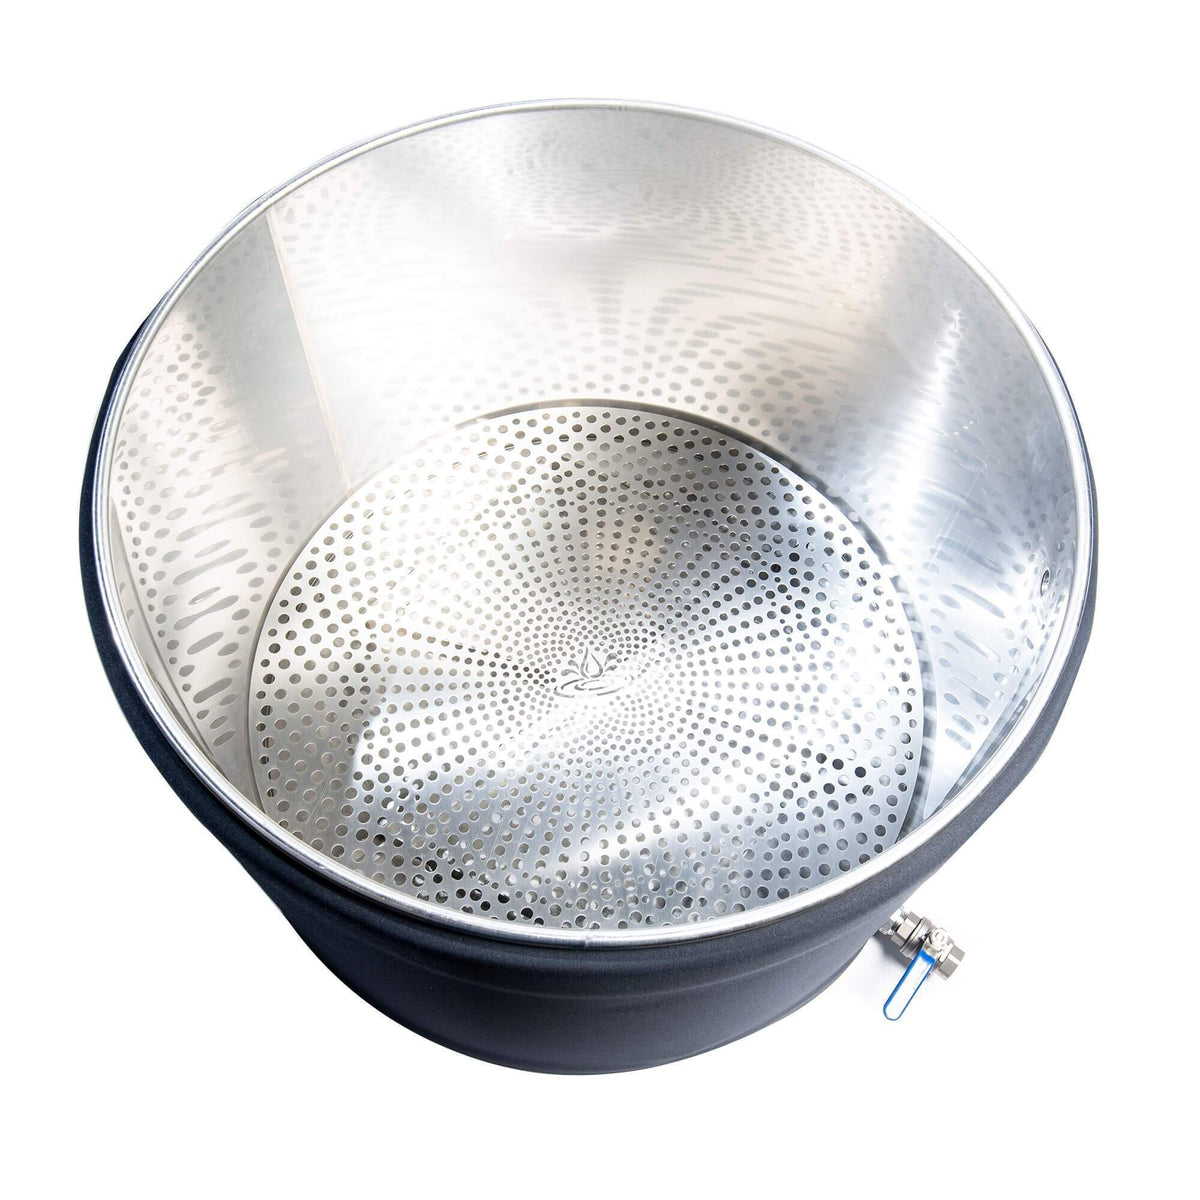 PurePressure Bruteless Stainless Steel Bubble Hash Washing Vessels